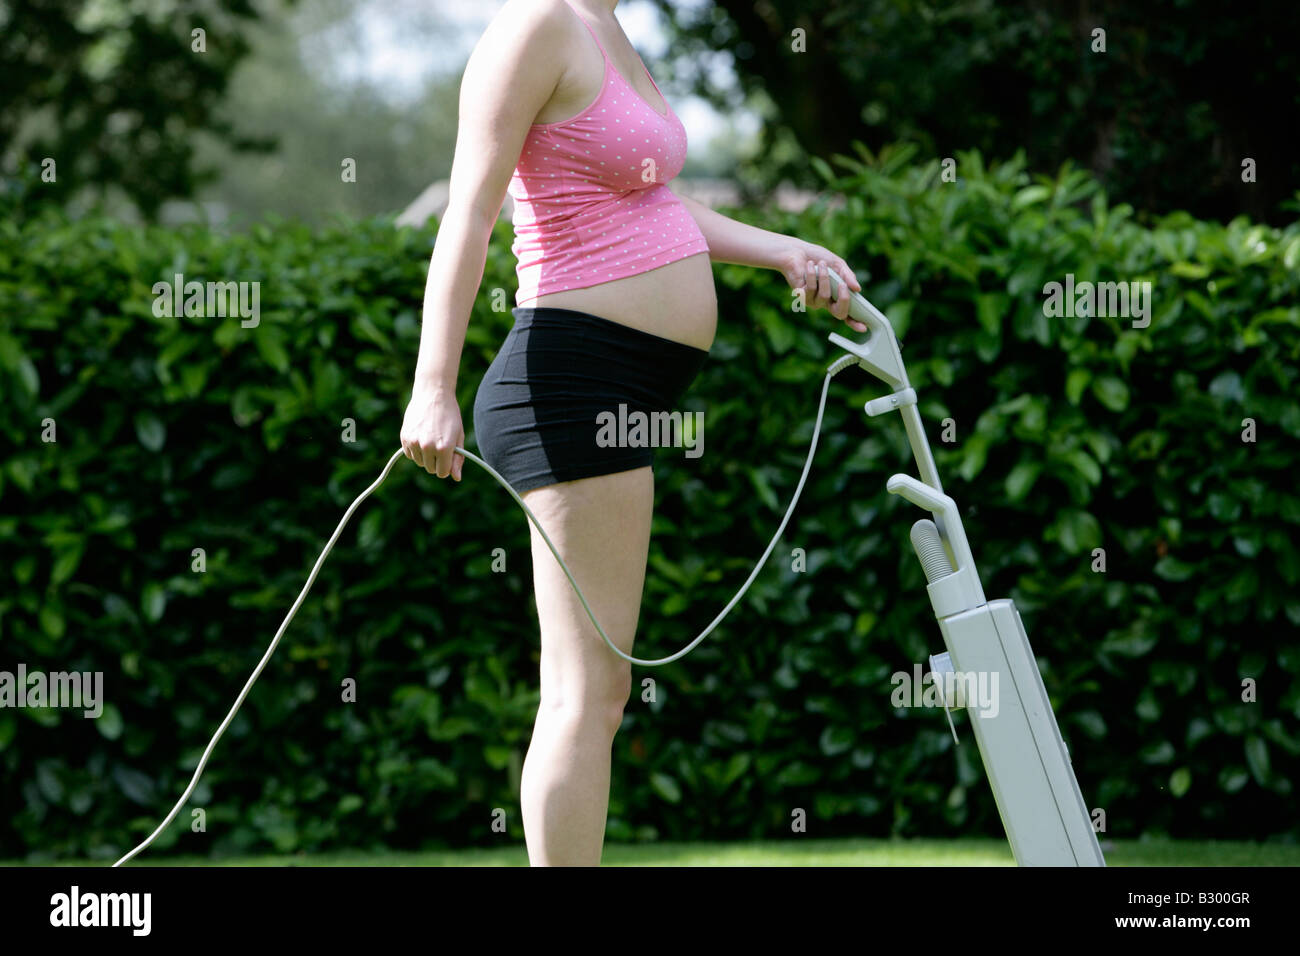 Pregnant Woman Mowing Lawn with Vaccuum Cleaner Stock Photo